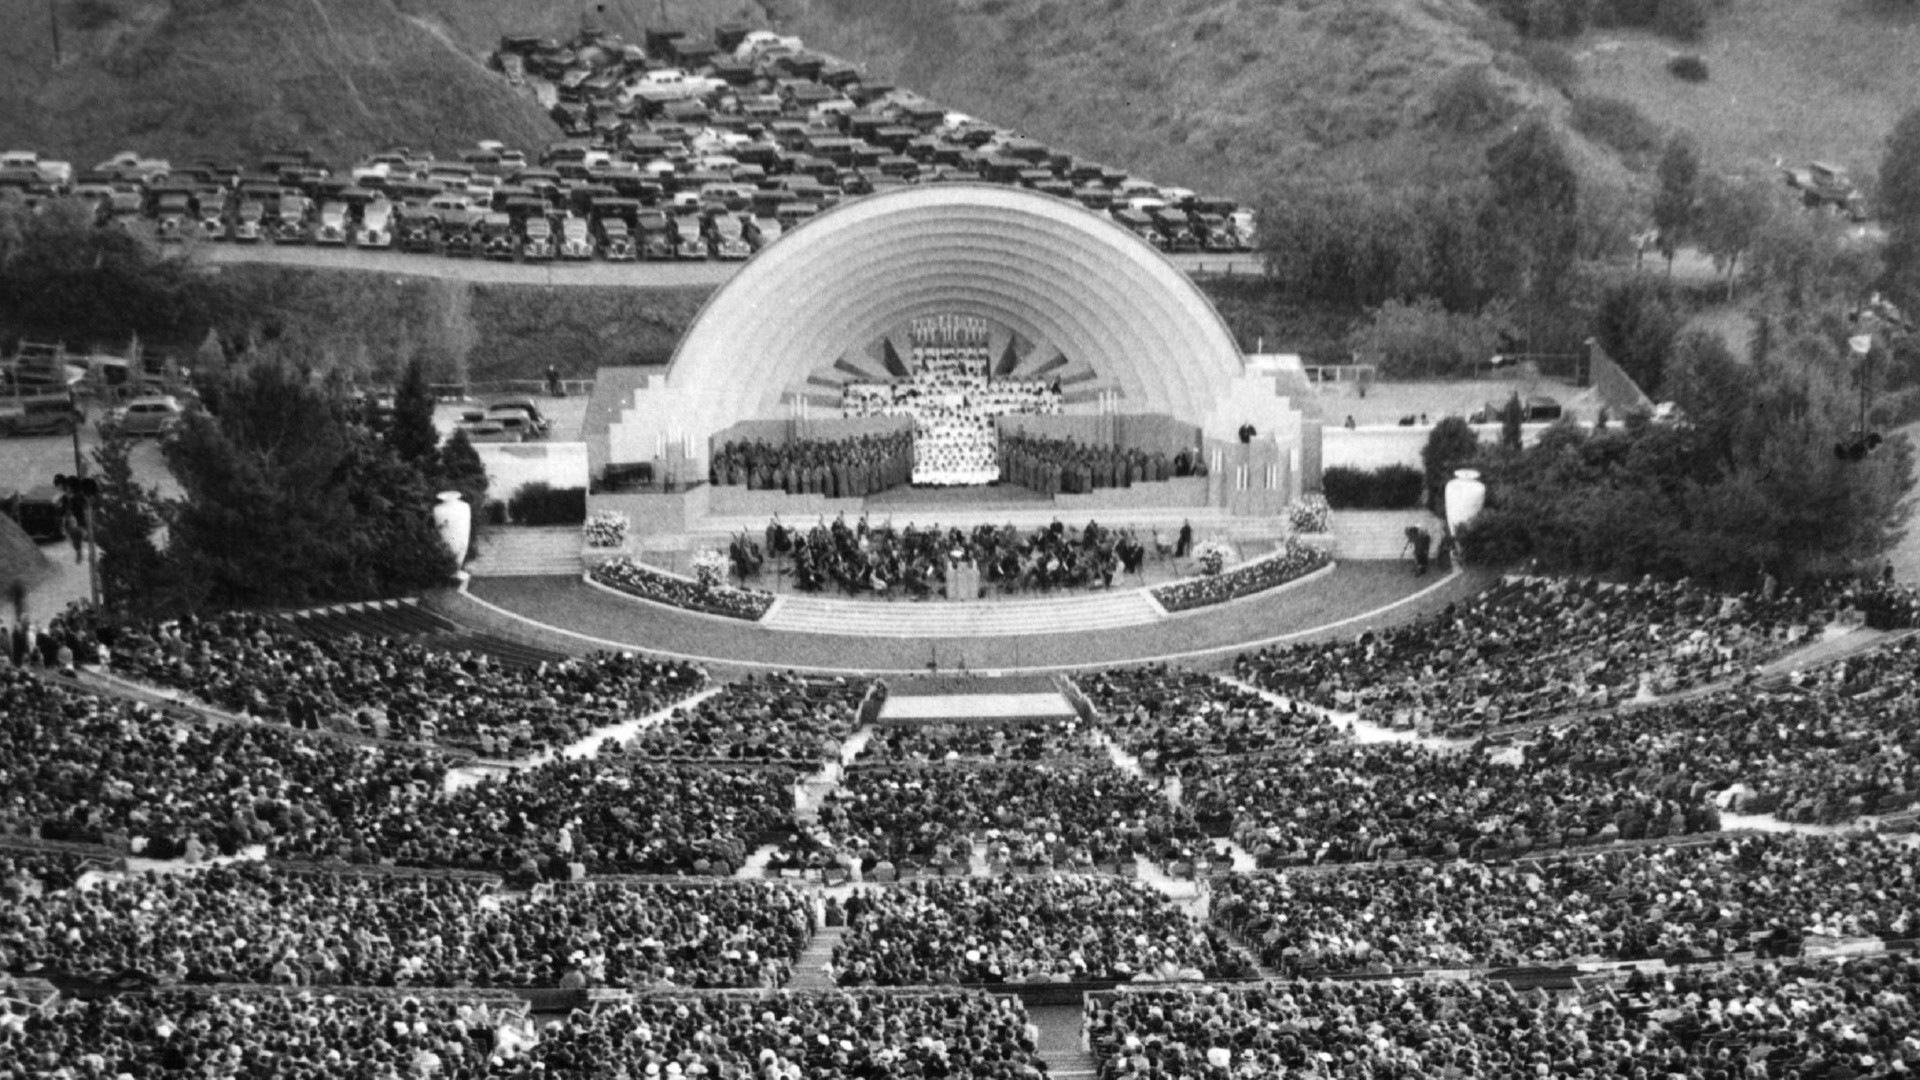 Really Tranquility rendering Celebrating the 100th anniversary of the Hollywood Bowl